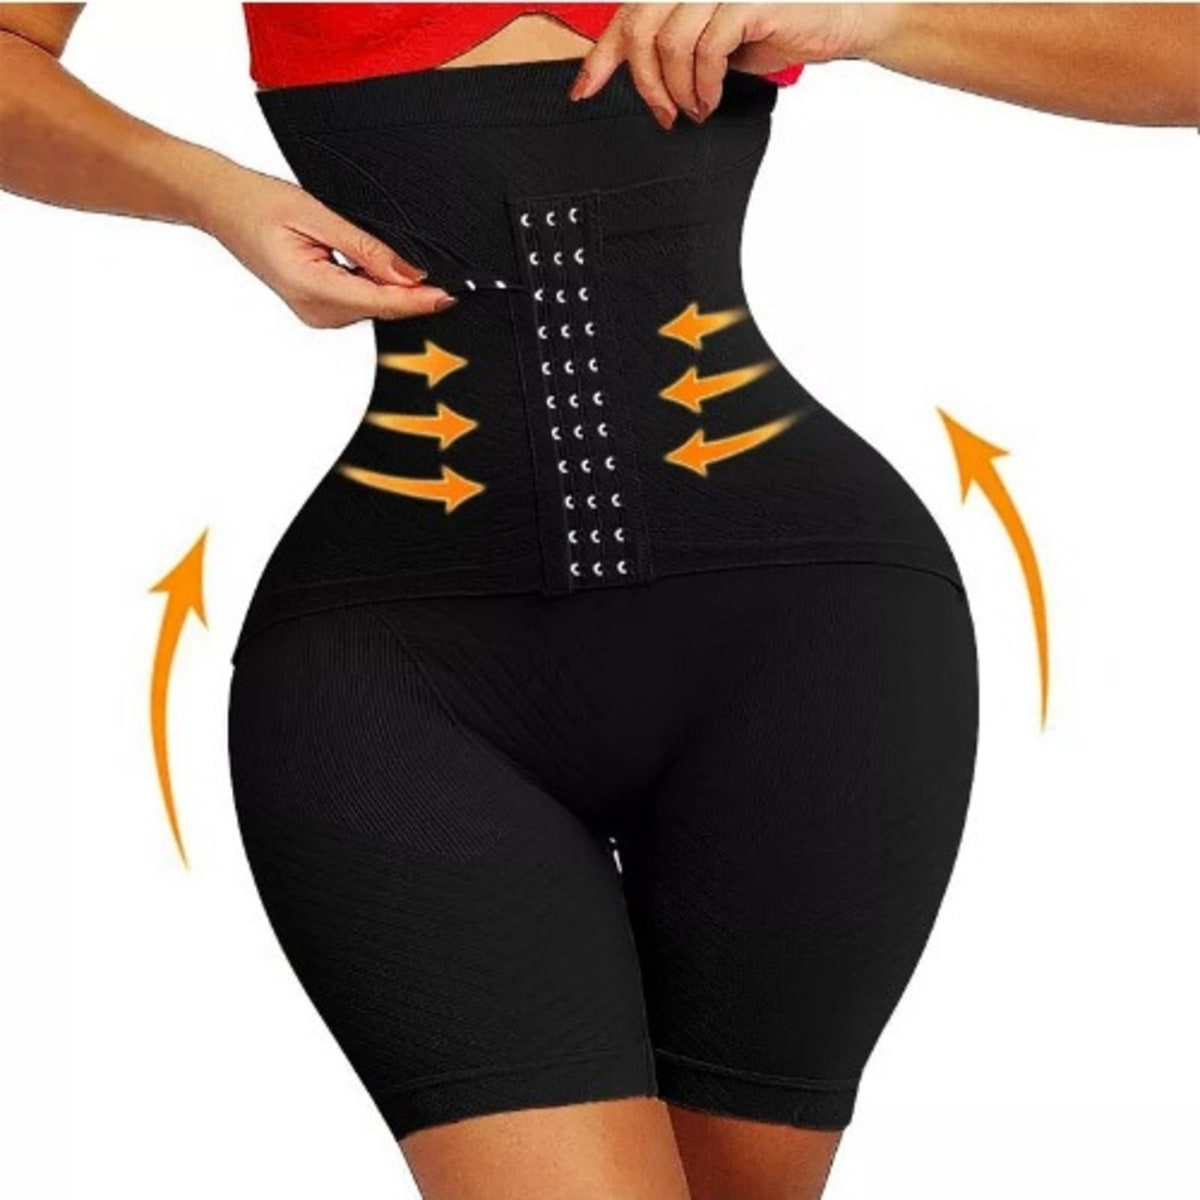 Belly Slimming Tight With Steel Bones And Hooks